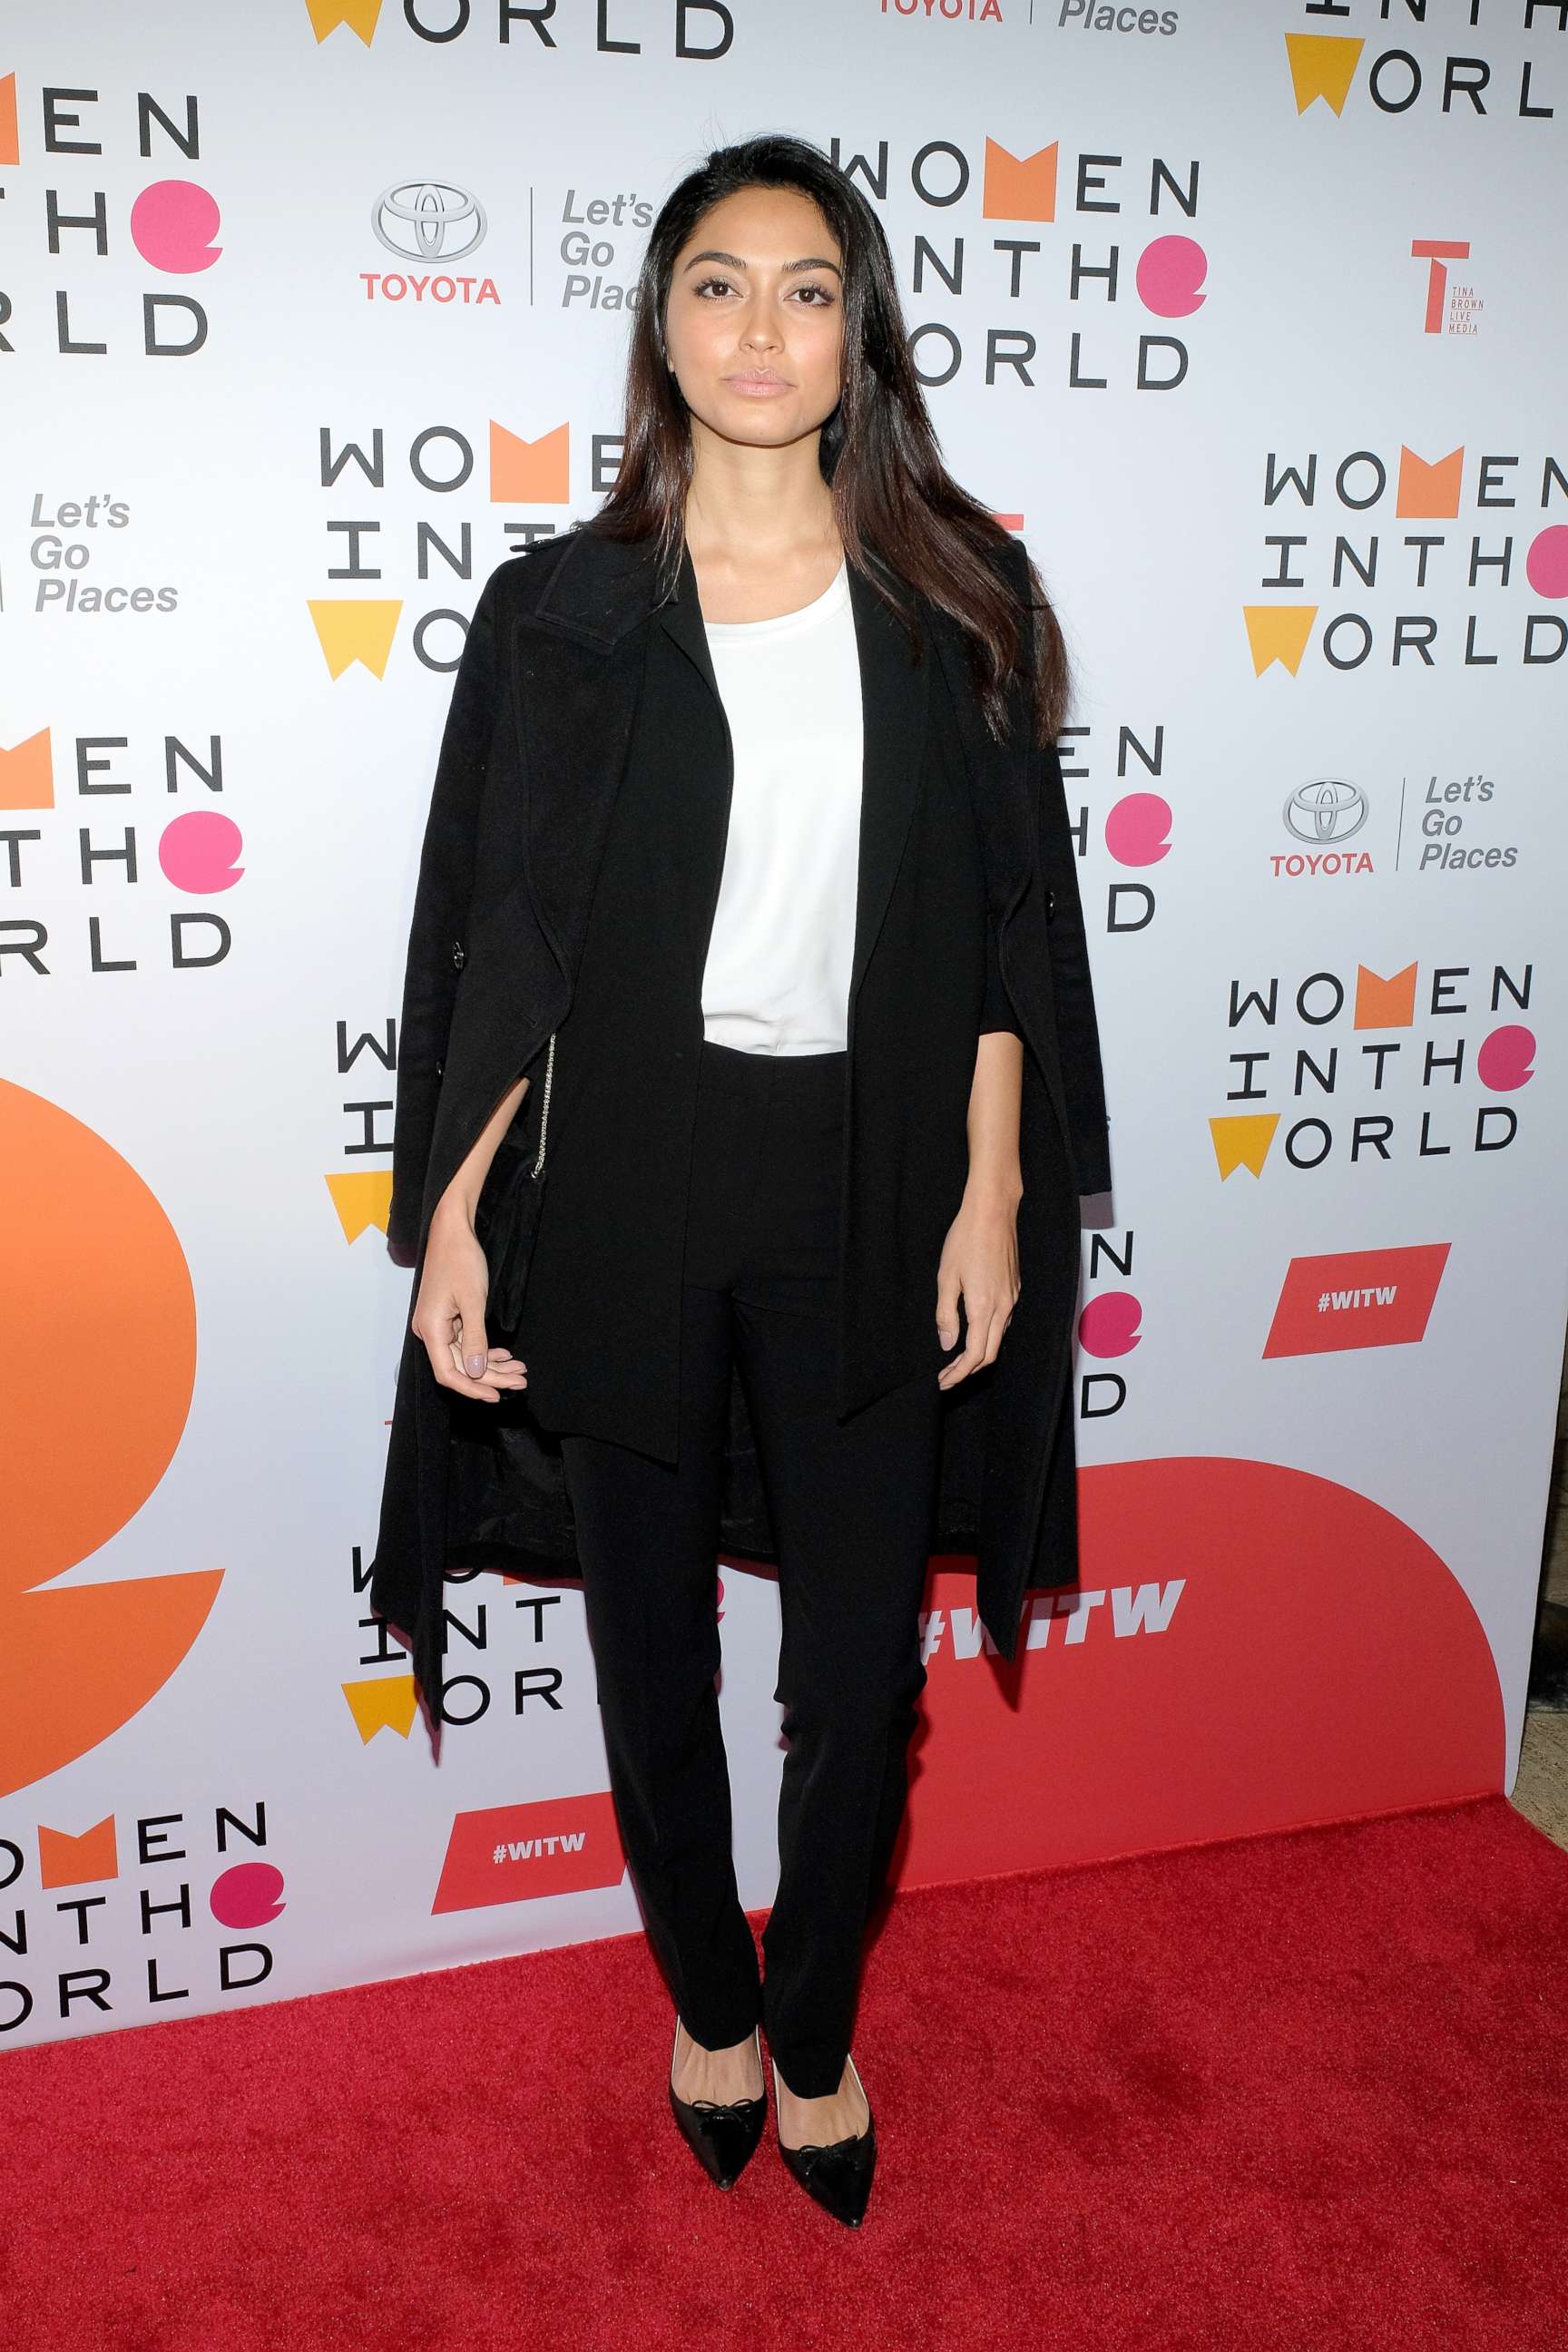 PHOTO: Ambra Gutierrez attends the 2018 Women In The World Summit at Lincoln Center, April 12, 2018, in New York City.